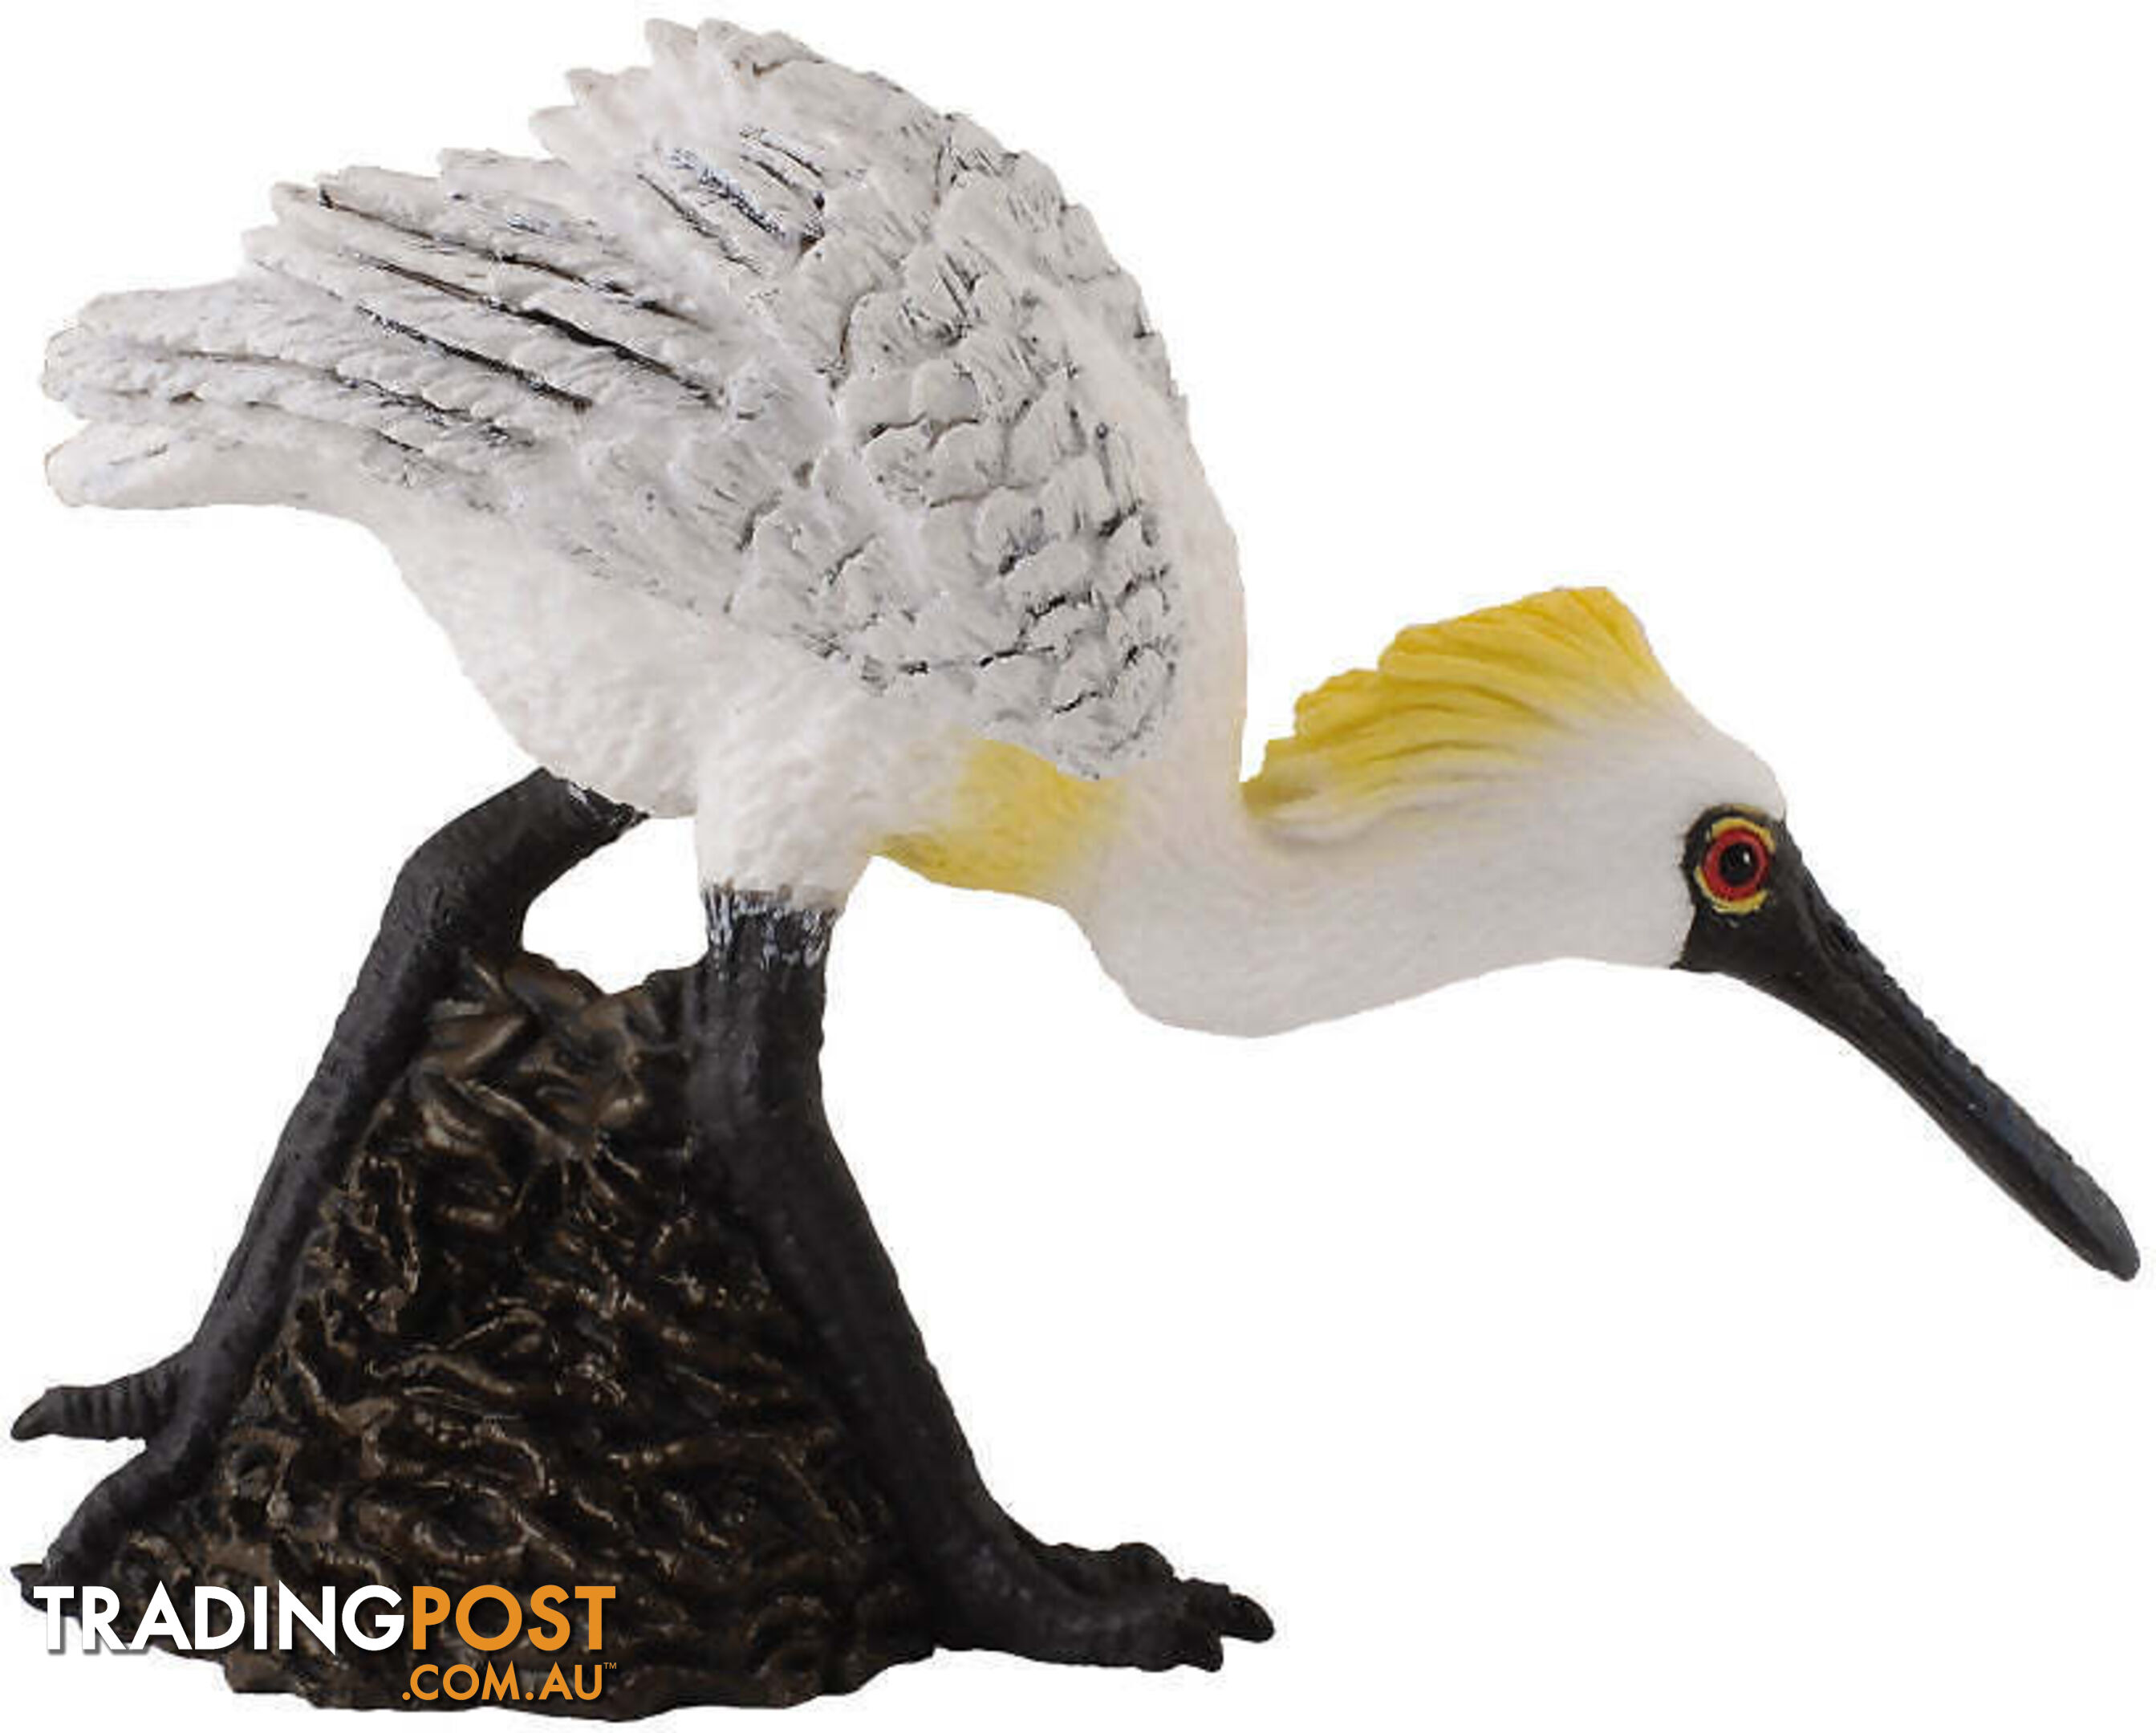 CollectA - Black Faced Spoonbill Walking Figurine - Rpco88397 - 4892900883977